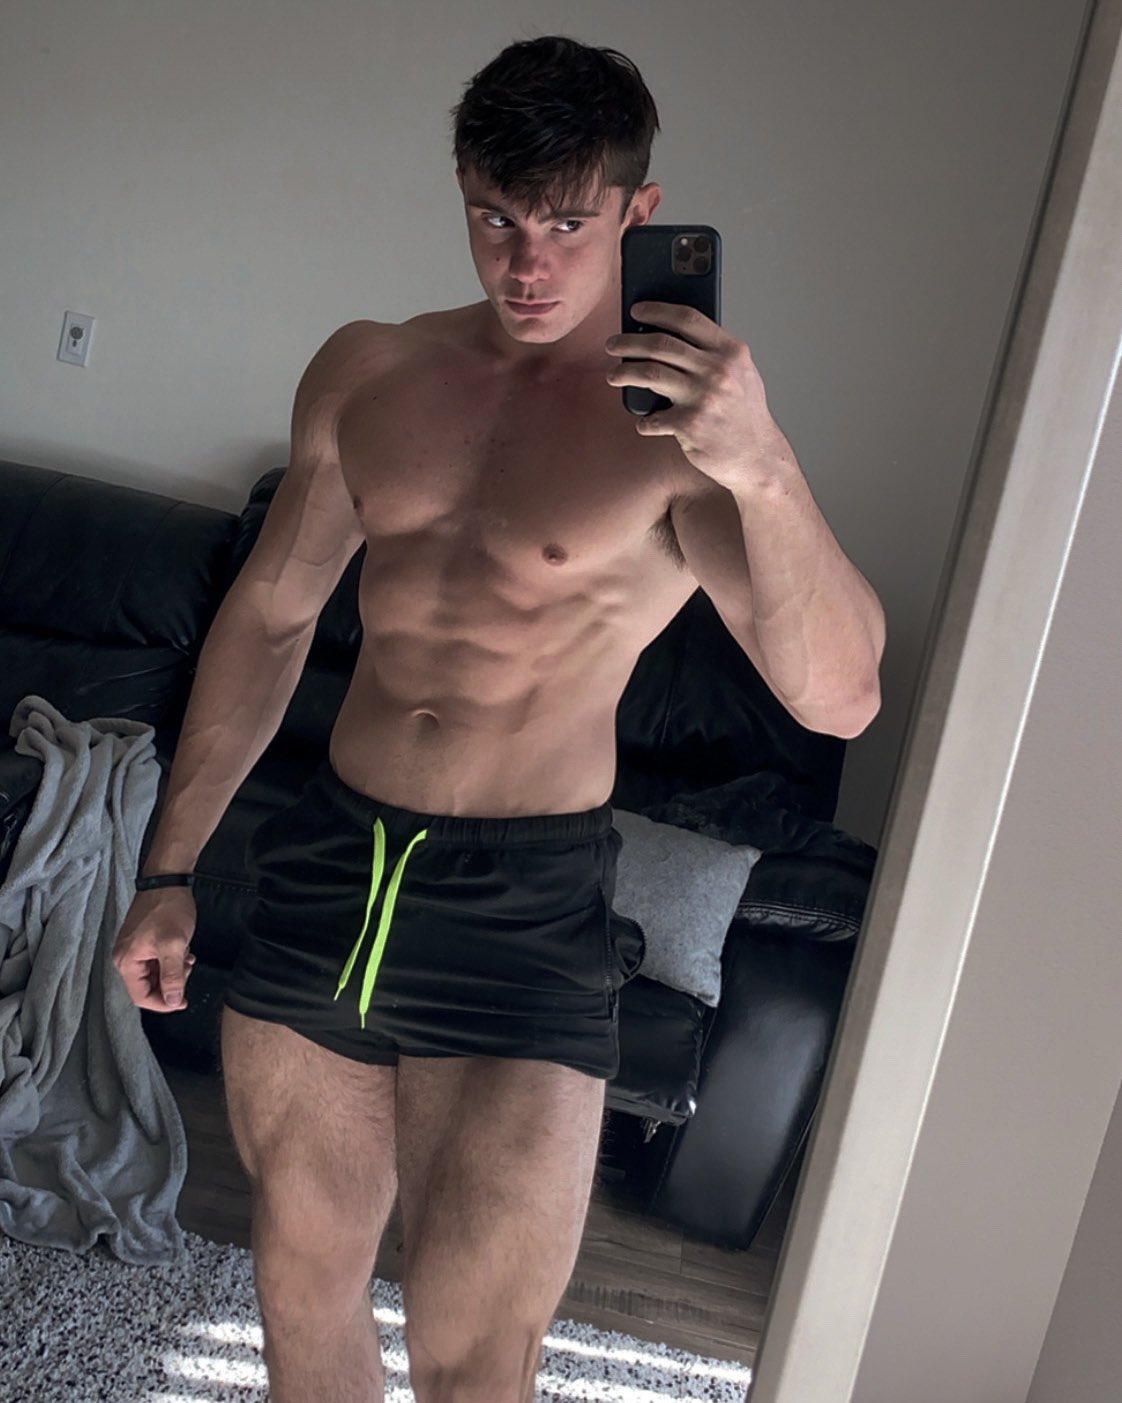 “sub to my onlyfans now https://t.co/q24zTilWem” .